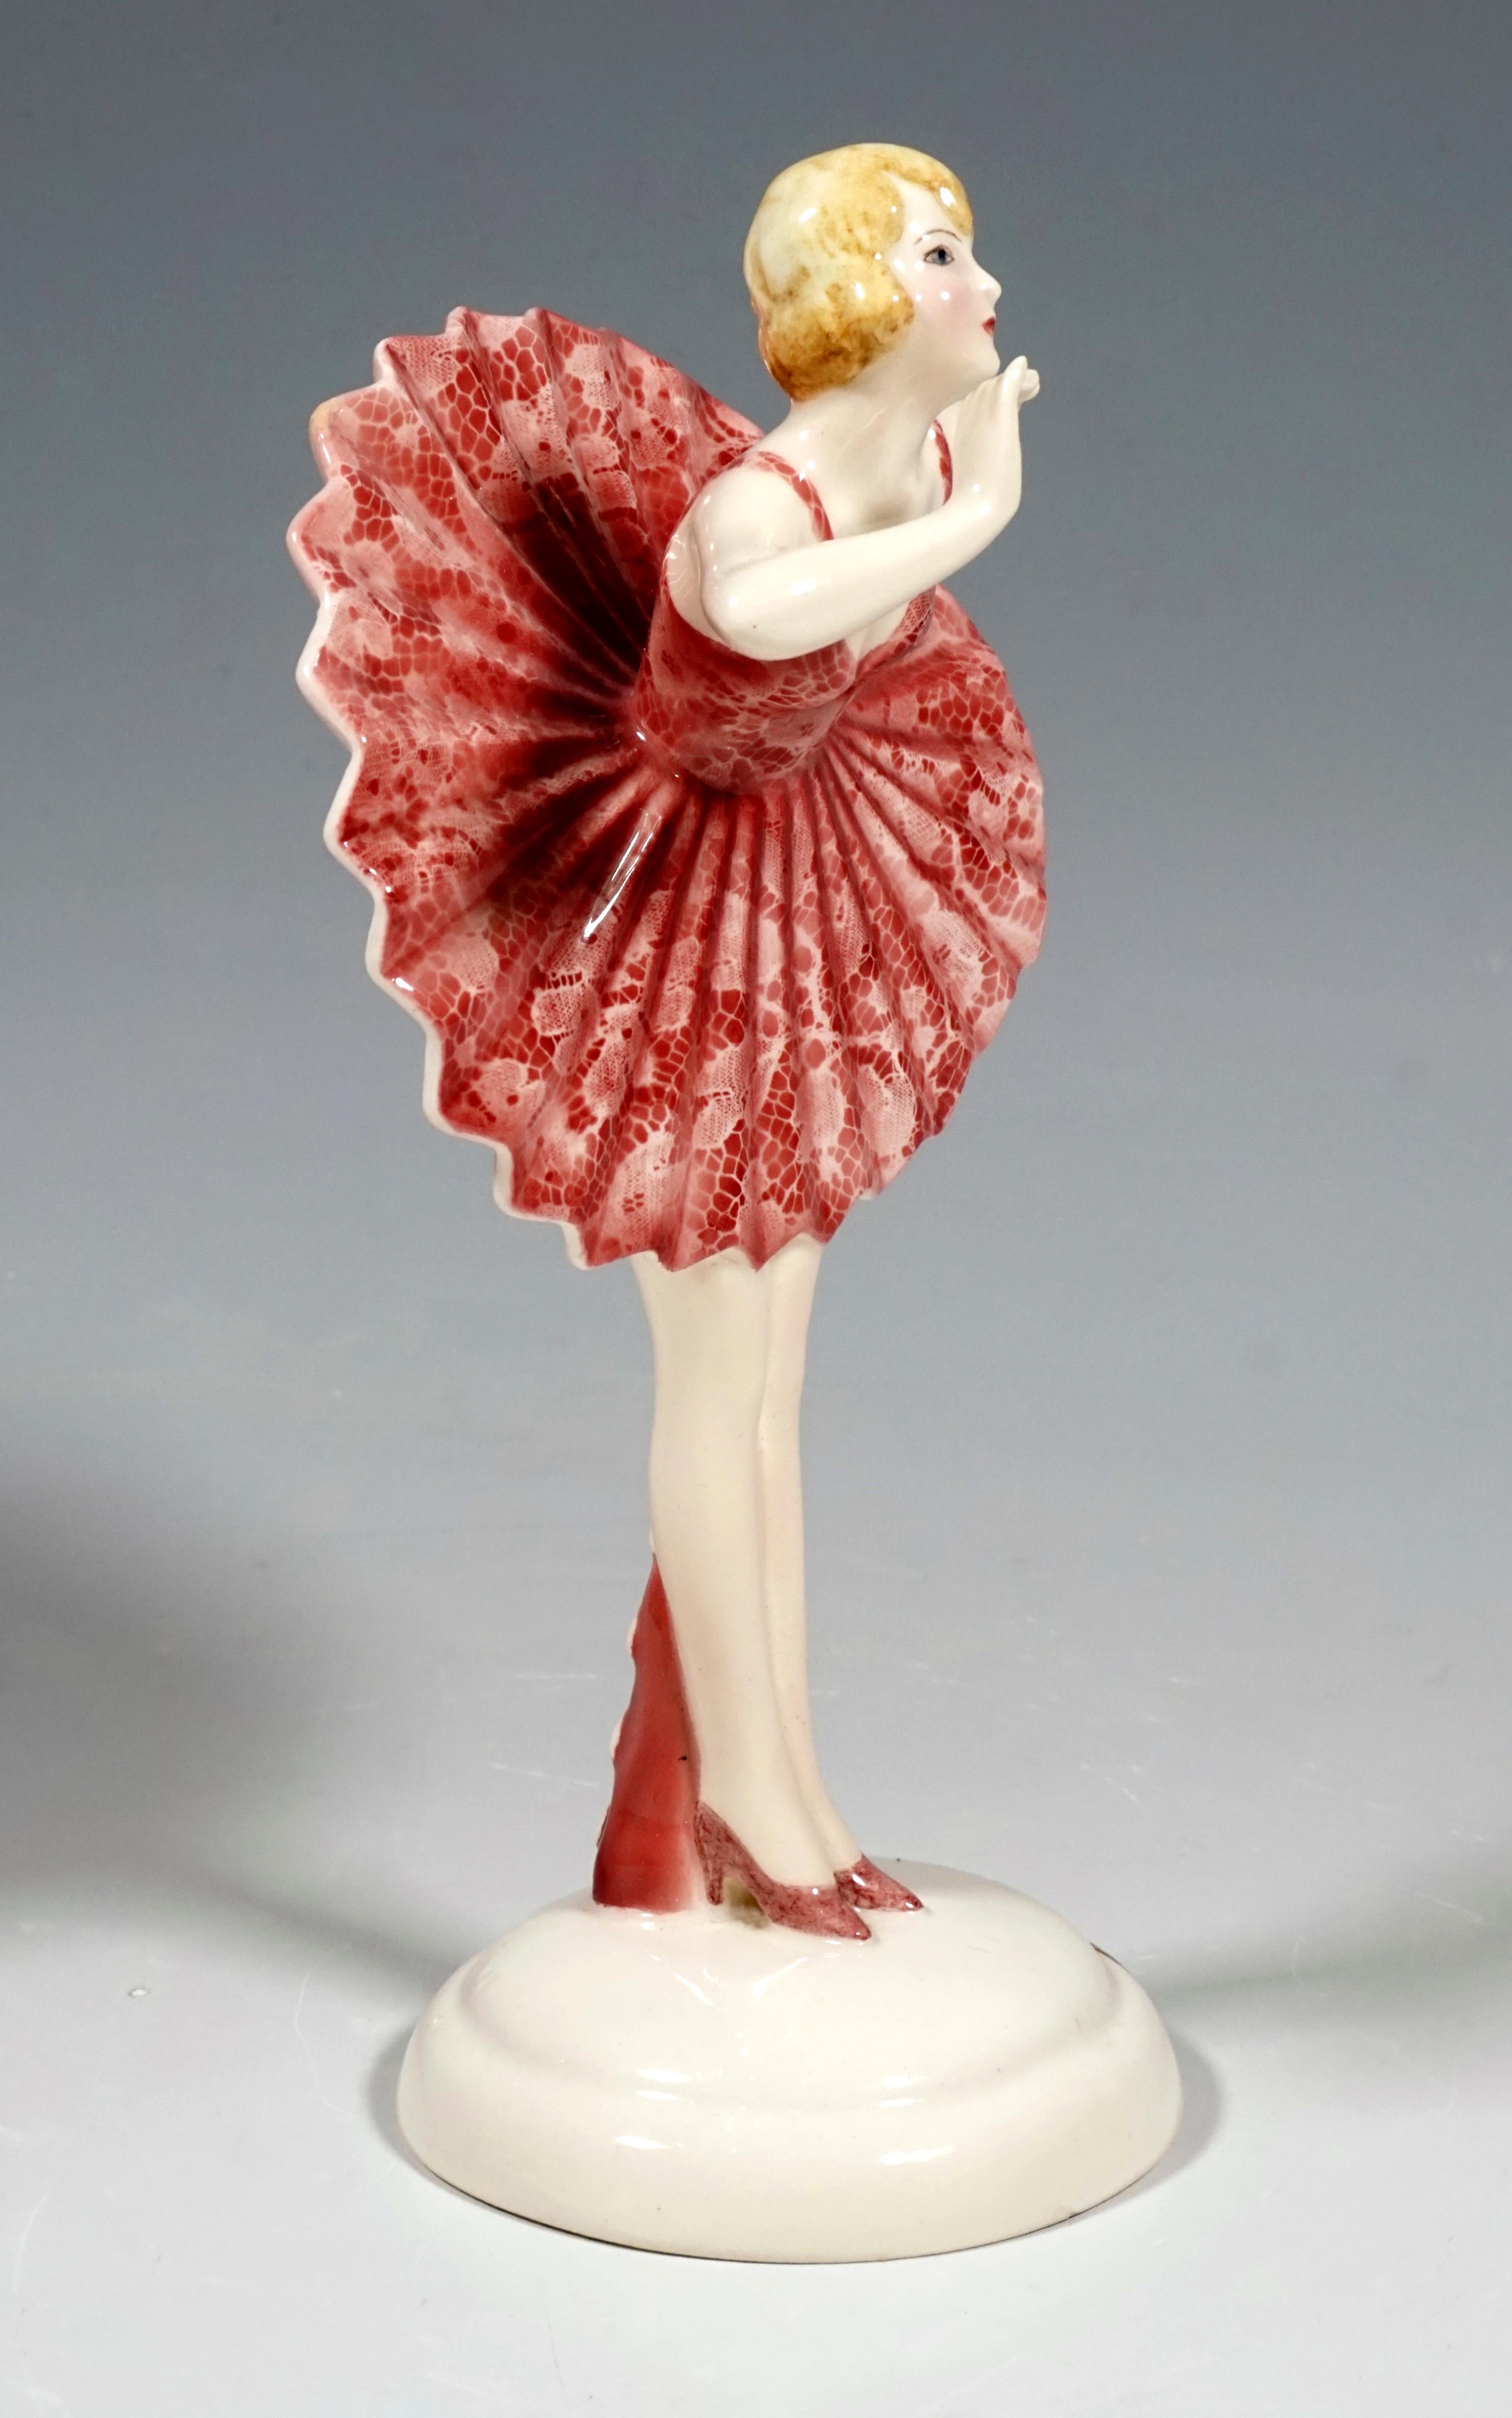 Remarkable Art Deco Goldscheider Ceramics Figurine of the 1930s.
The young dancer with short hair bows before her audience so that the pleated skirt with a zigzag hem stands up like a star. The Pierrette has put down her pointed hat on the floor